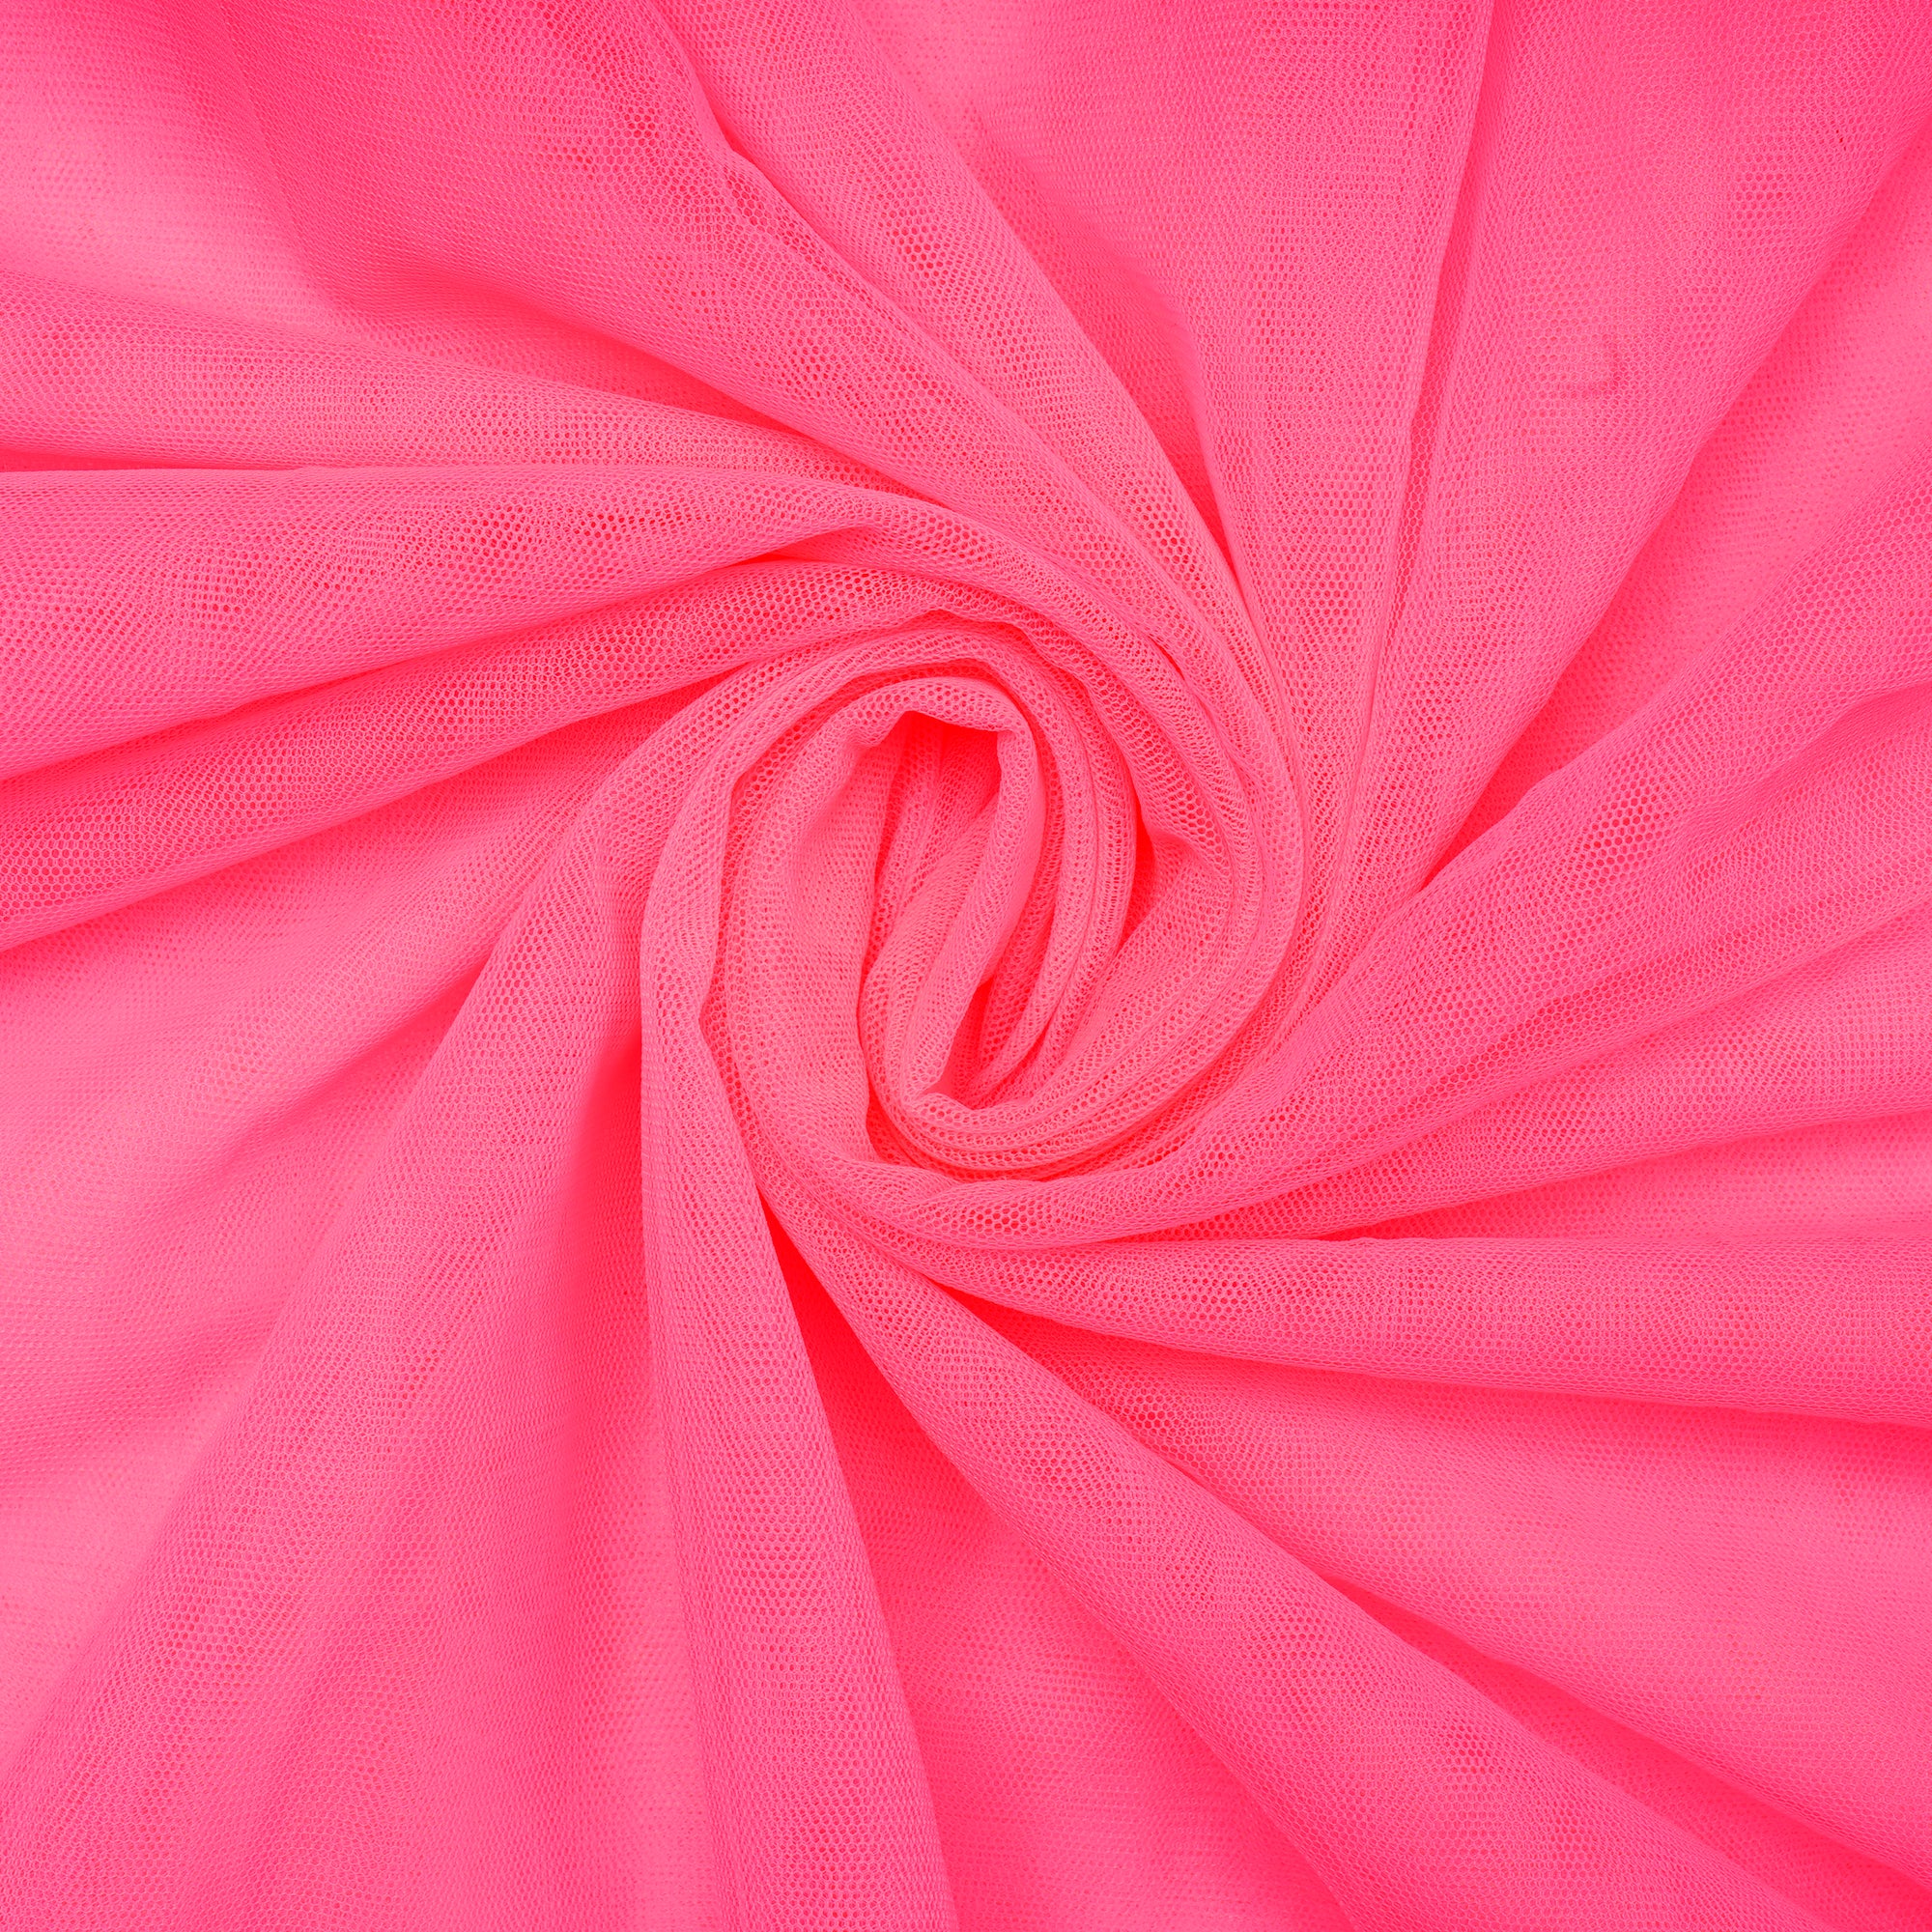 Bright Neon Pink Color Nylon Butterfly Net Fabric